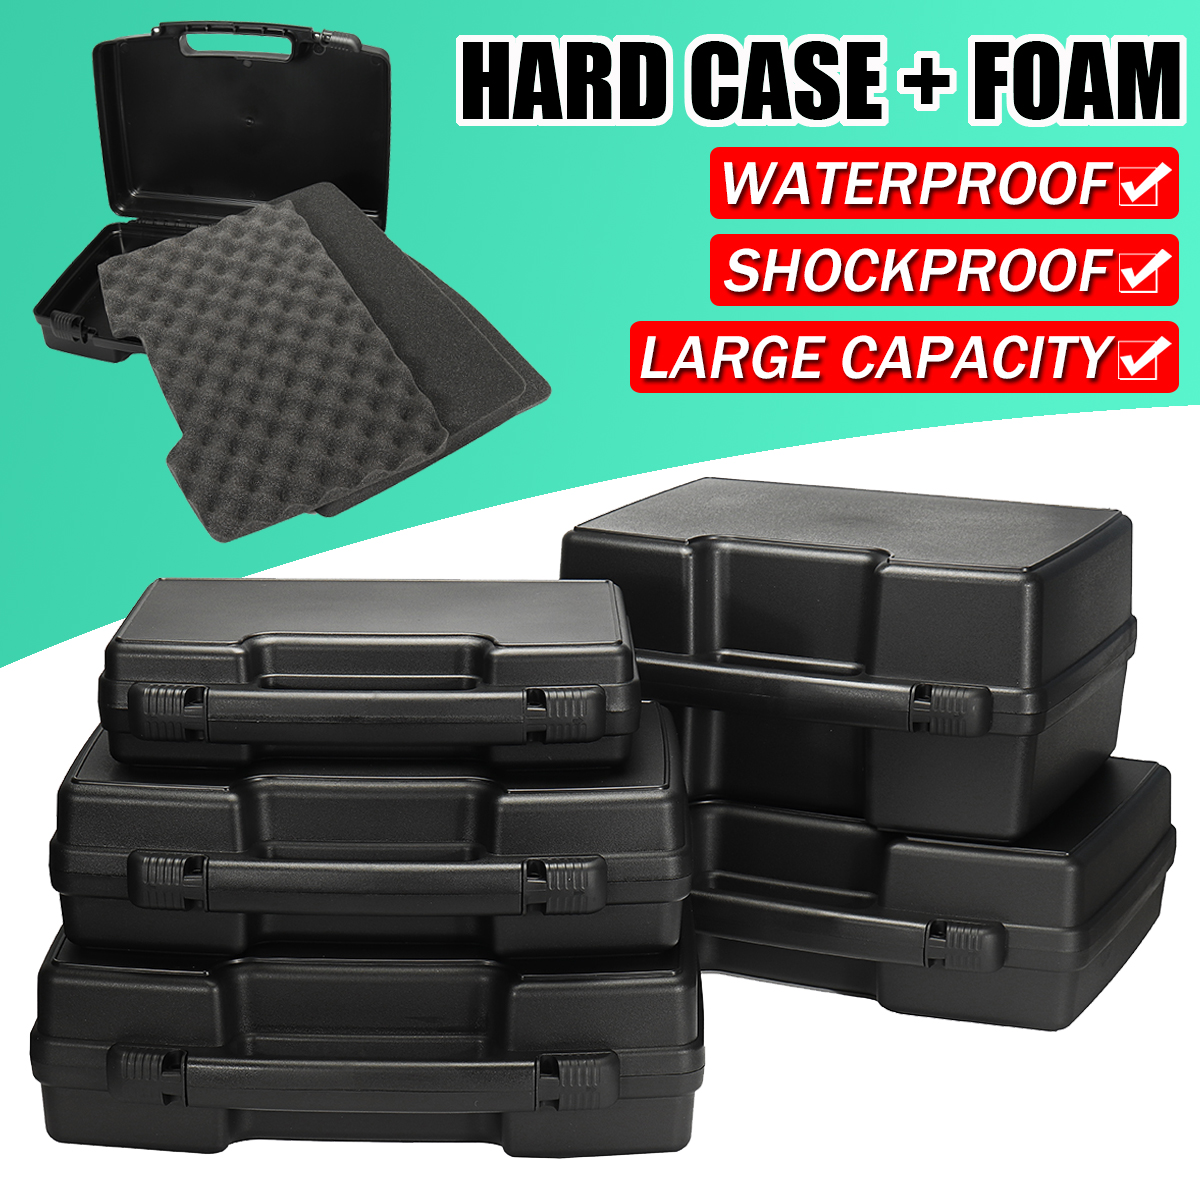 Waterproof-Hard-Carry-Tool-Case-Bag-Storage-Box-Camera-Photography-with-Foam-1791082-1